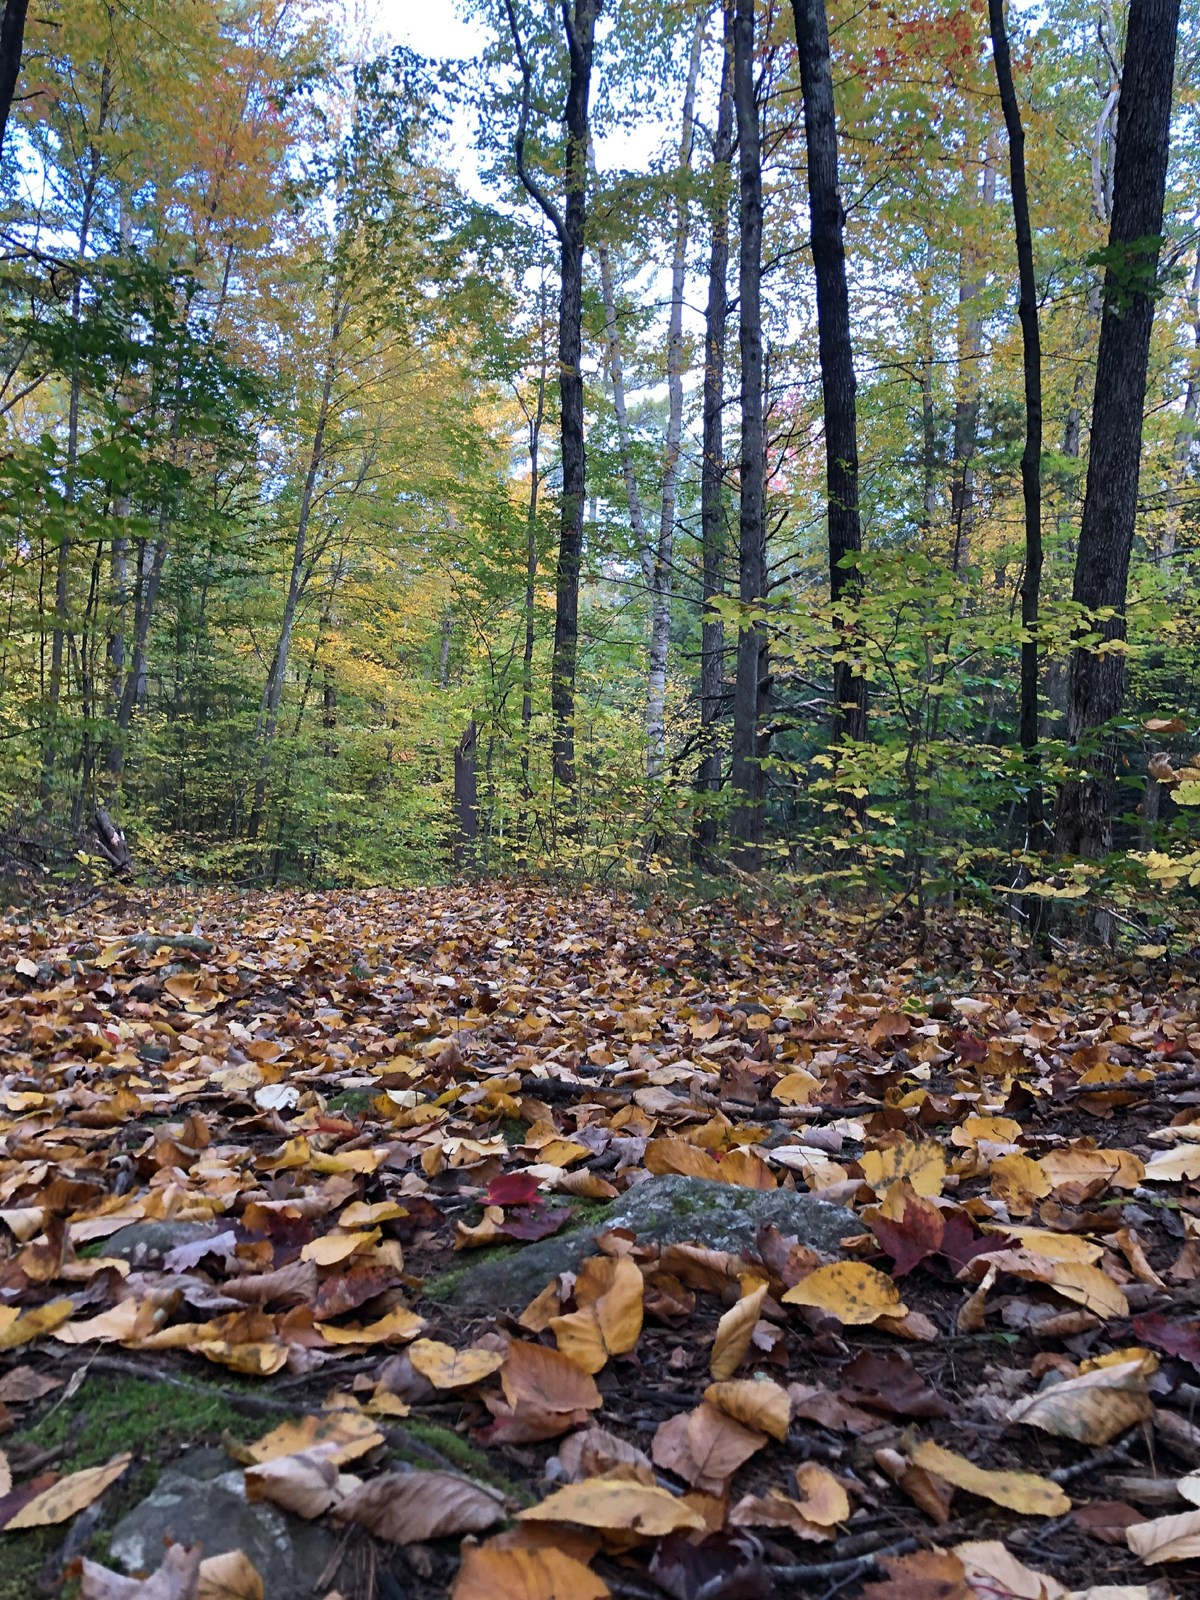 Leaf covered trail in a forest in fall